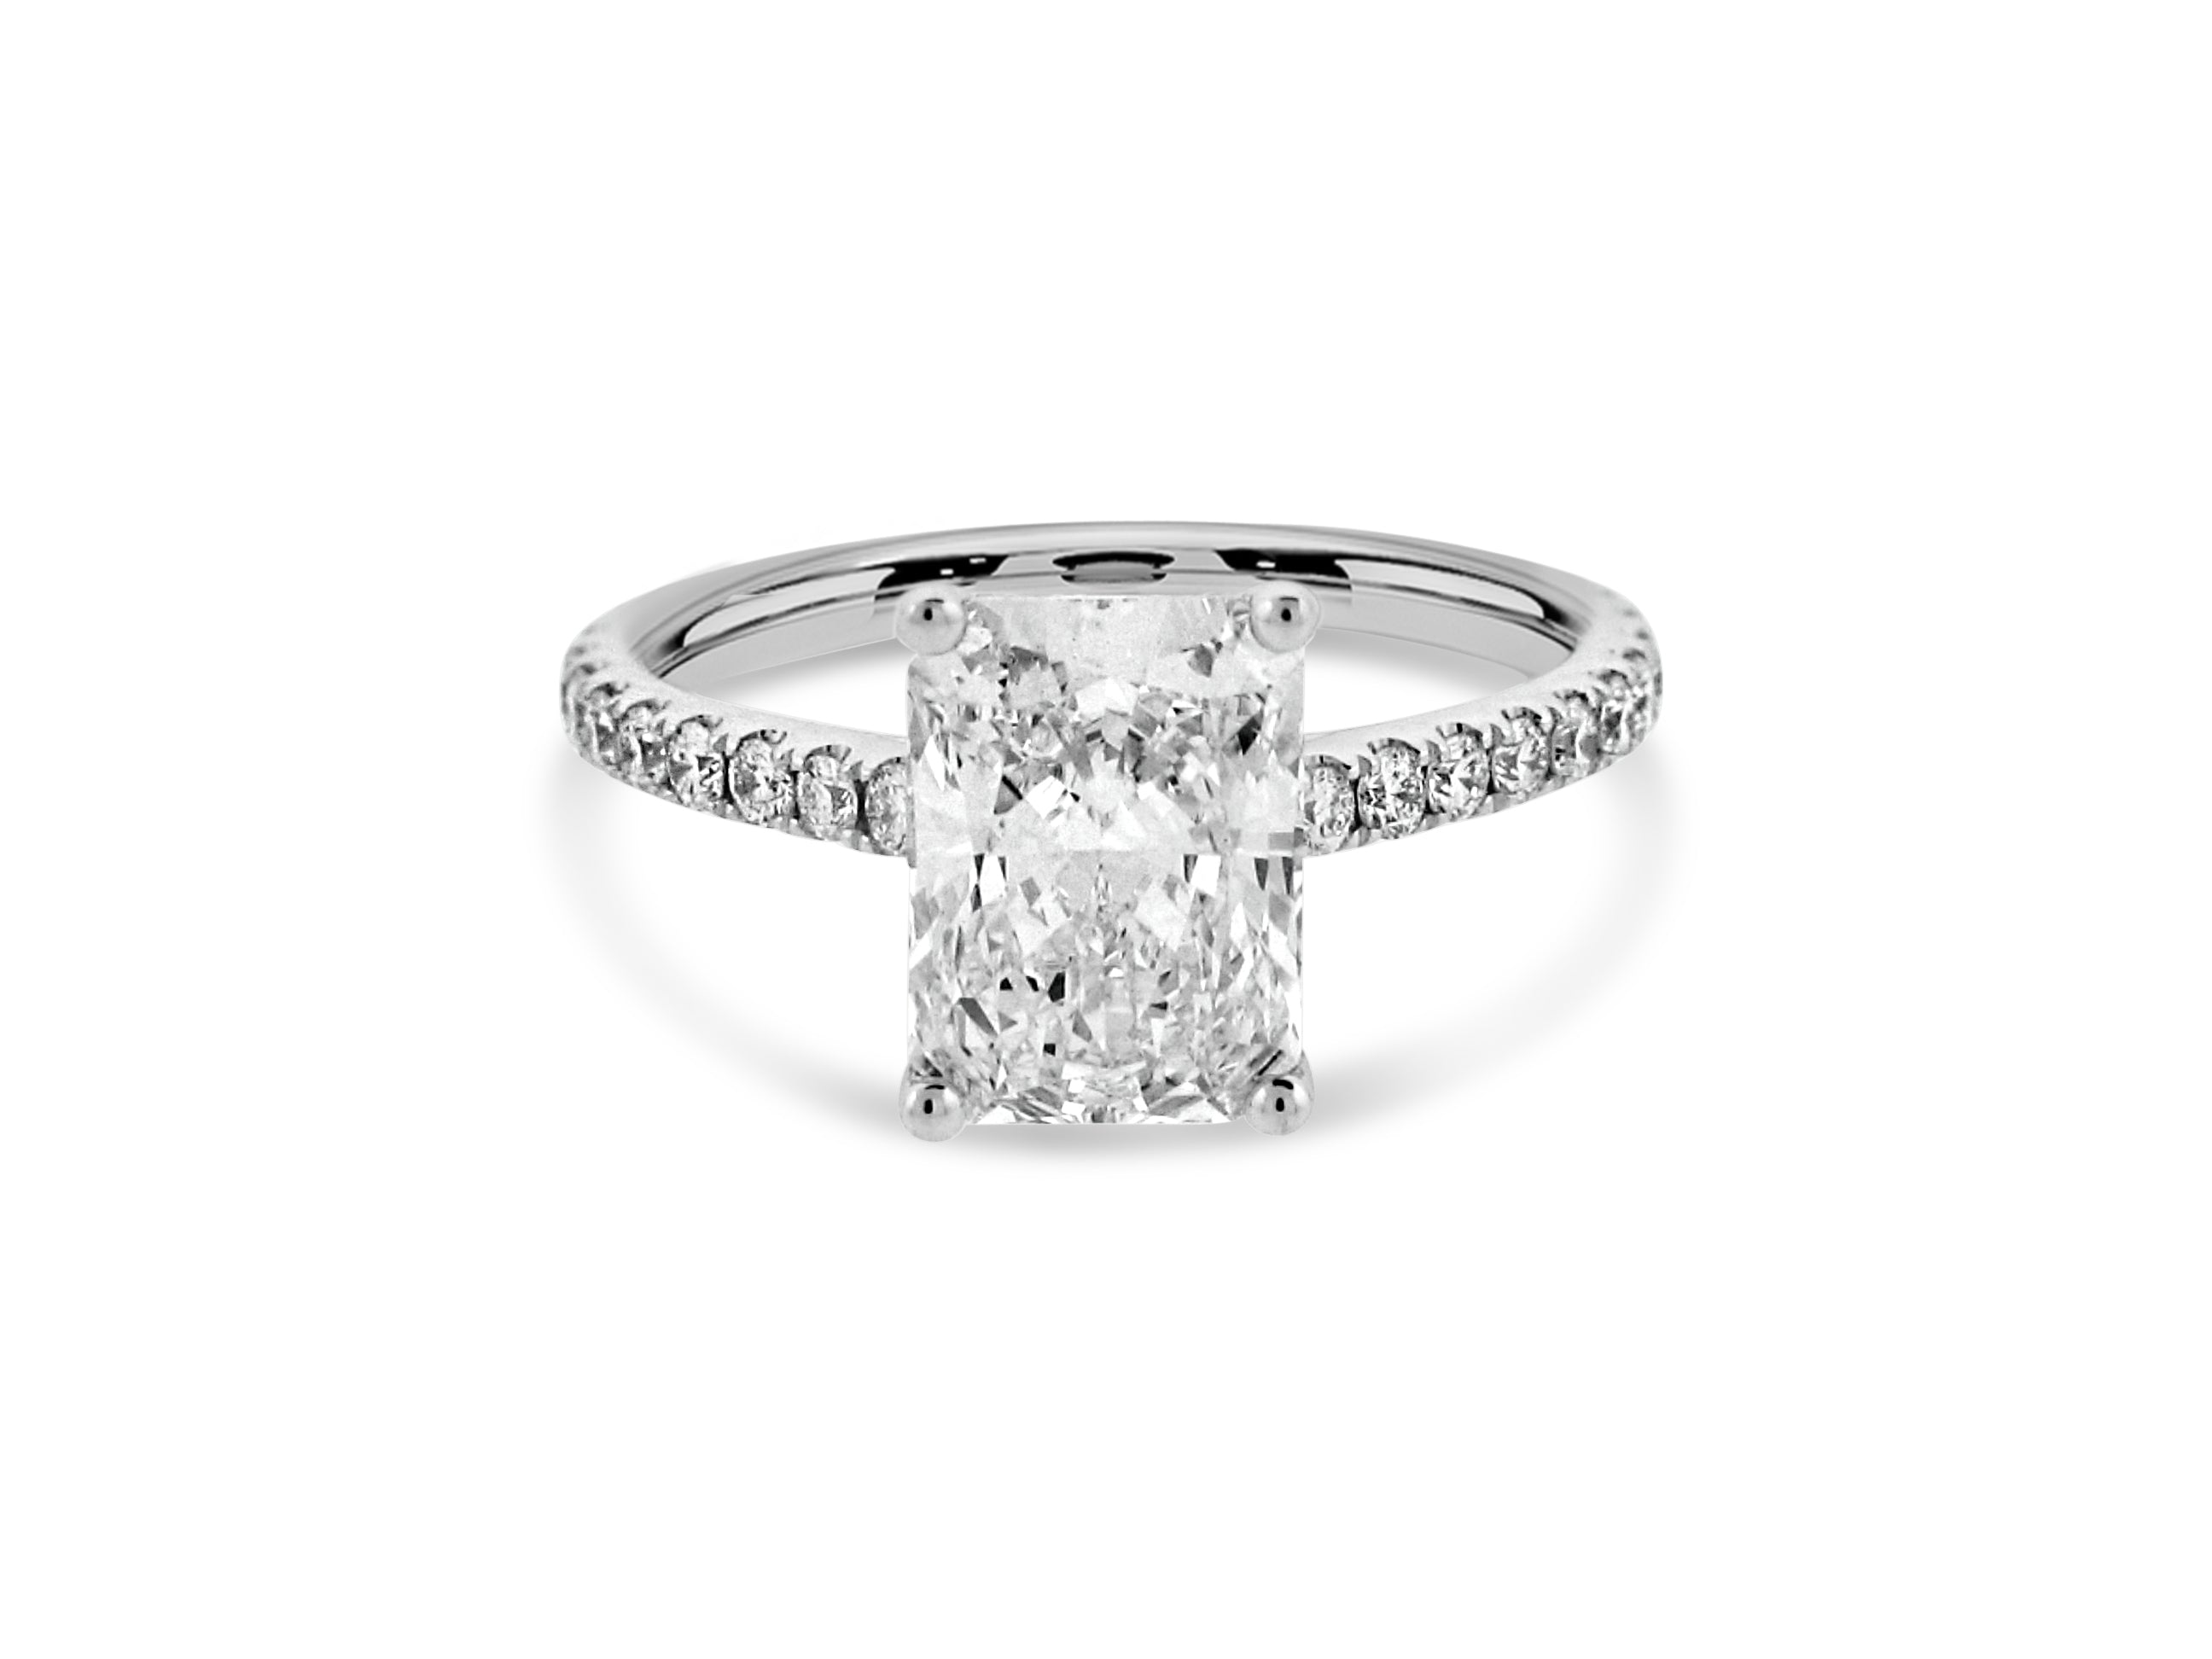 PRIVE' 18K WHITE GOLD 2.51CT RADIANT CUT LAB GROWN DIAMOND BY SWAROVSKI SI1 CLARITY AND F COLOR RADIANT. .50CT SI - G ACCENT NATURAL DIAMONDS